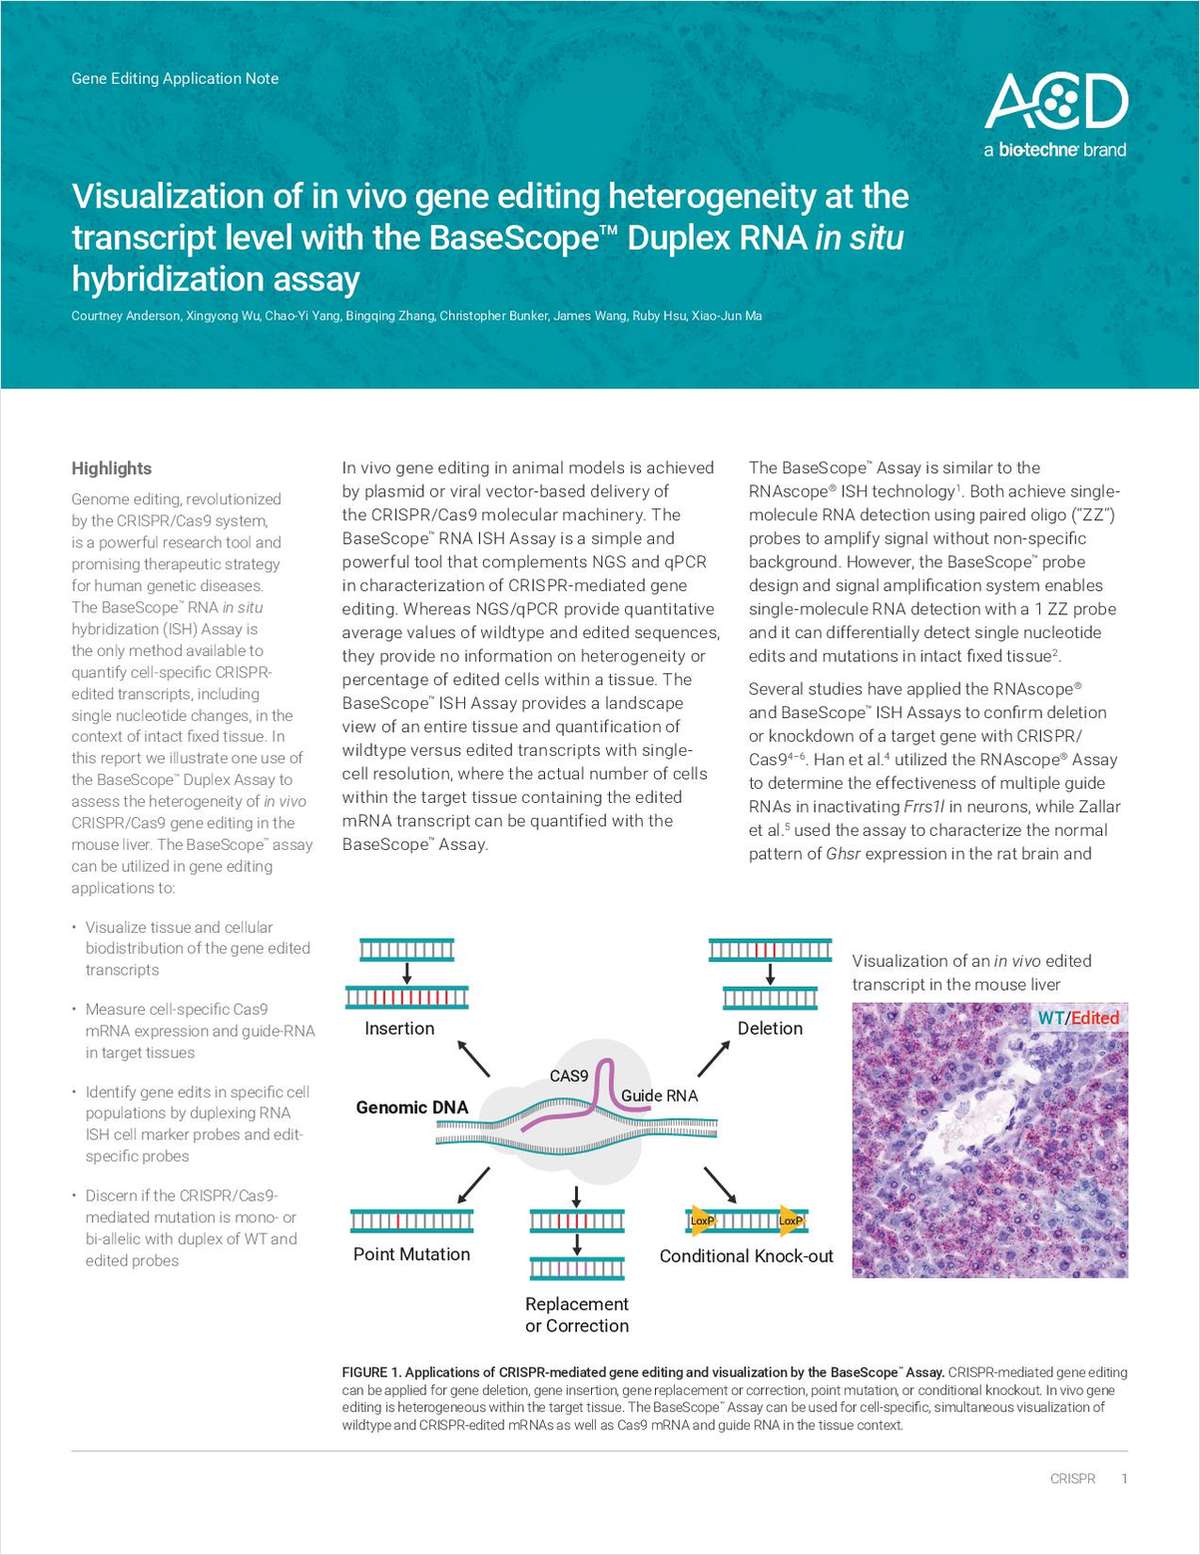 Visualization of in Vivo Gene Editing Heterogeneity at the Transcript Level With the Basescope Duplex Rna in Situ Hybridization Assay